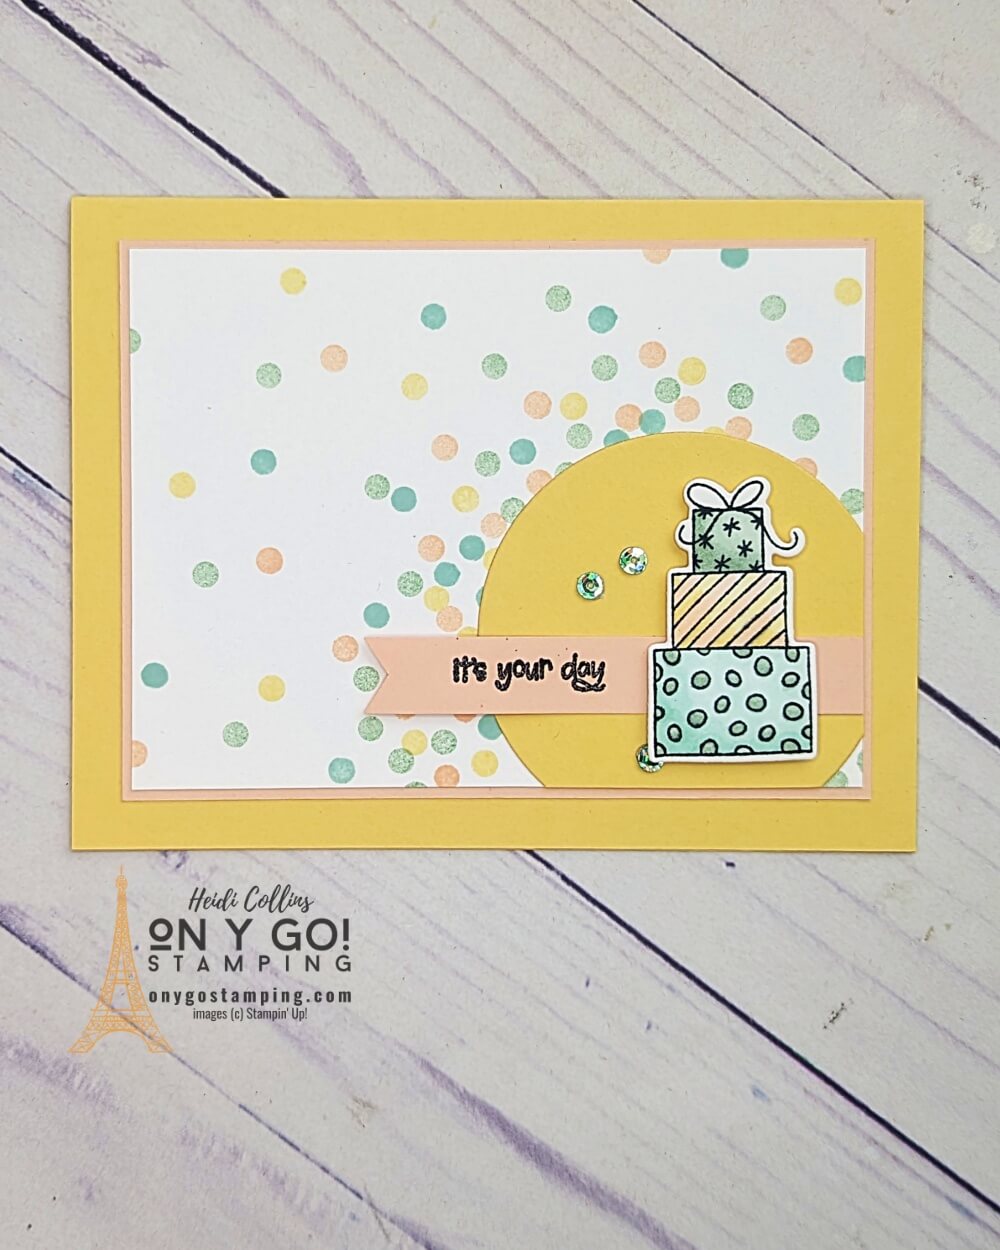 See how to make a fun handmade birthday card with the Warm Welcome stamp set and dies from Stampin' Up!®